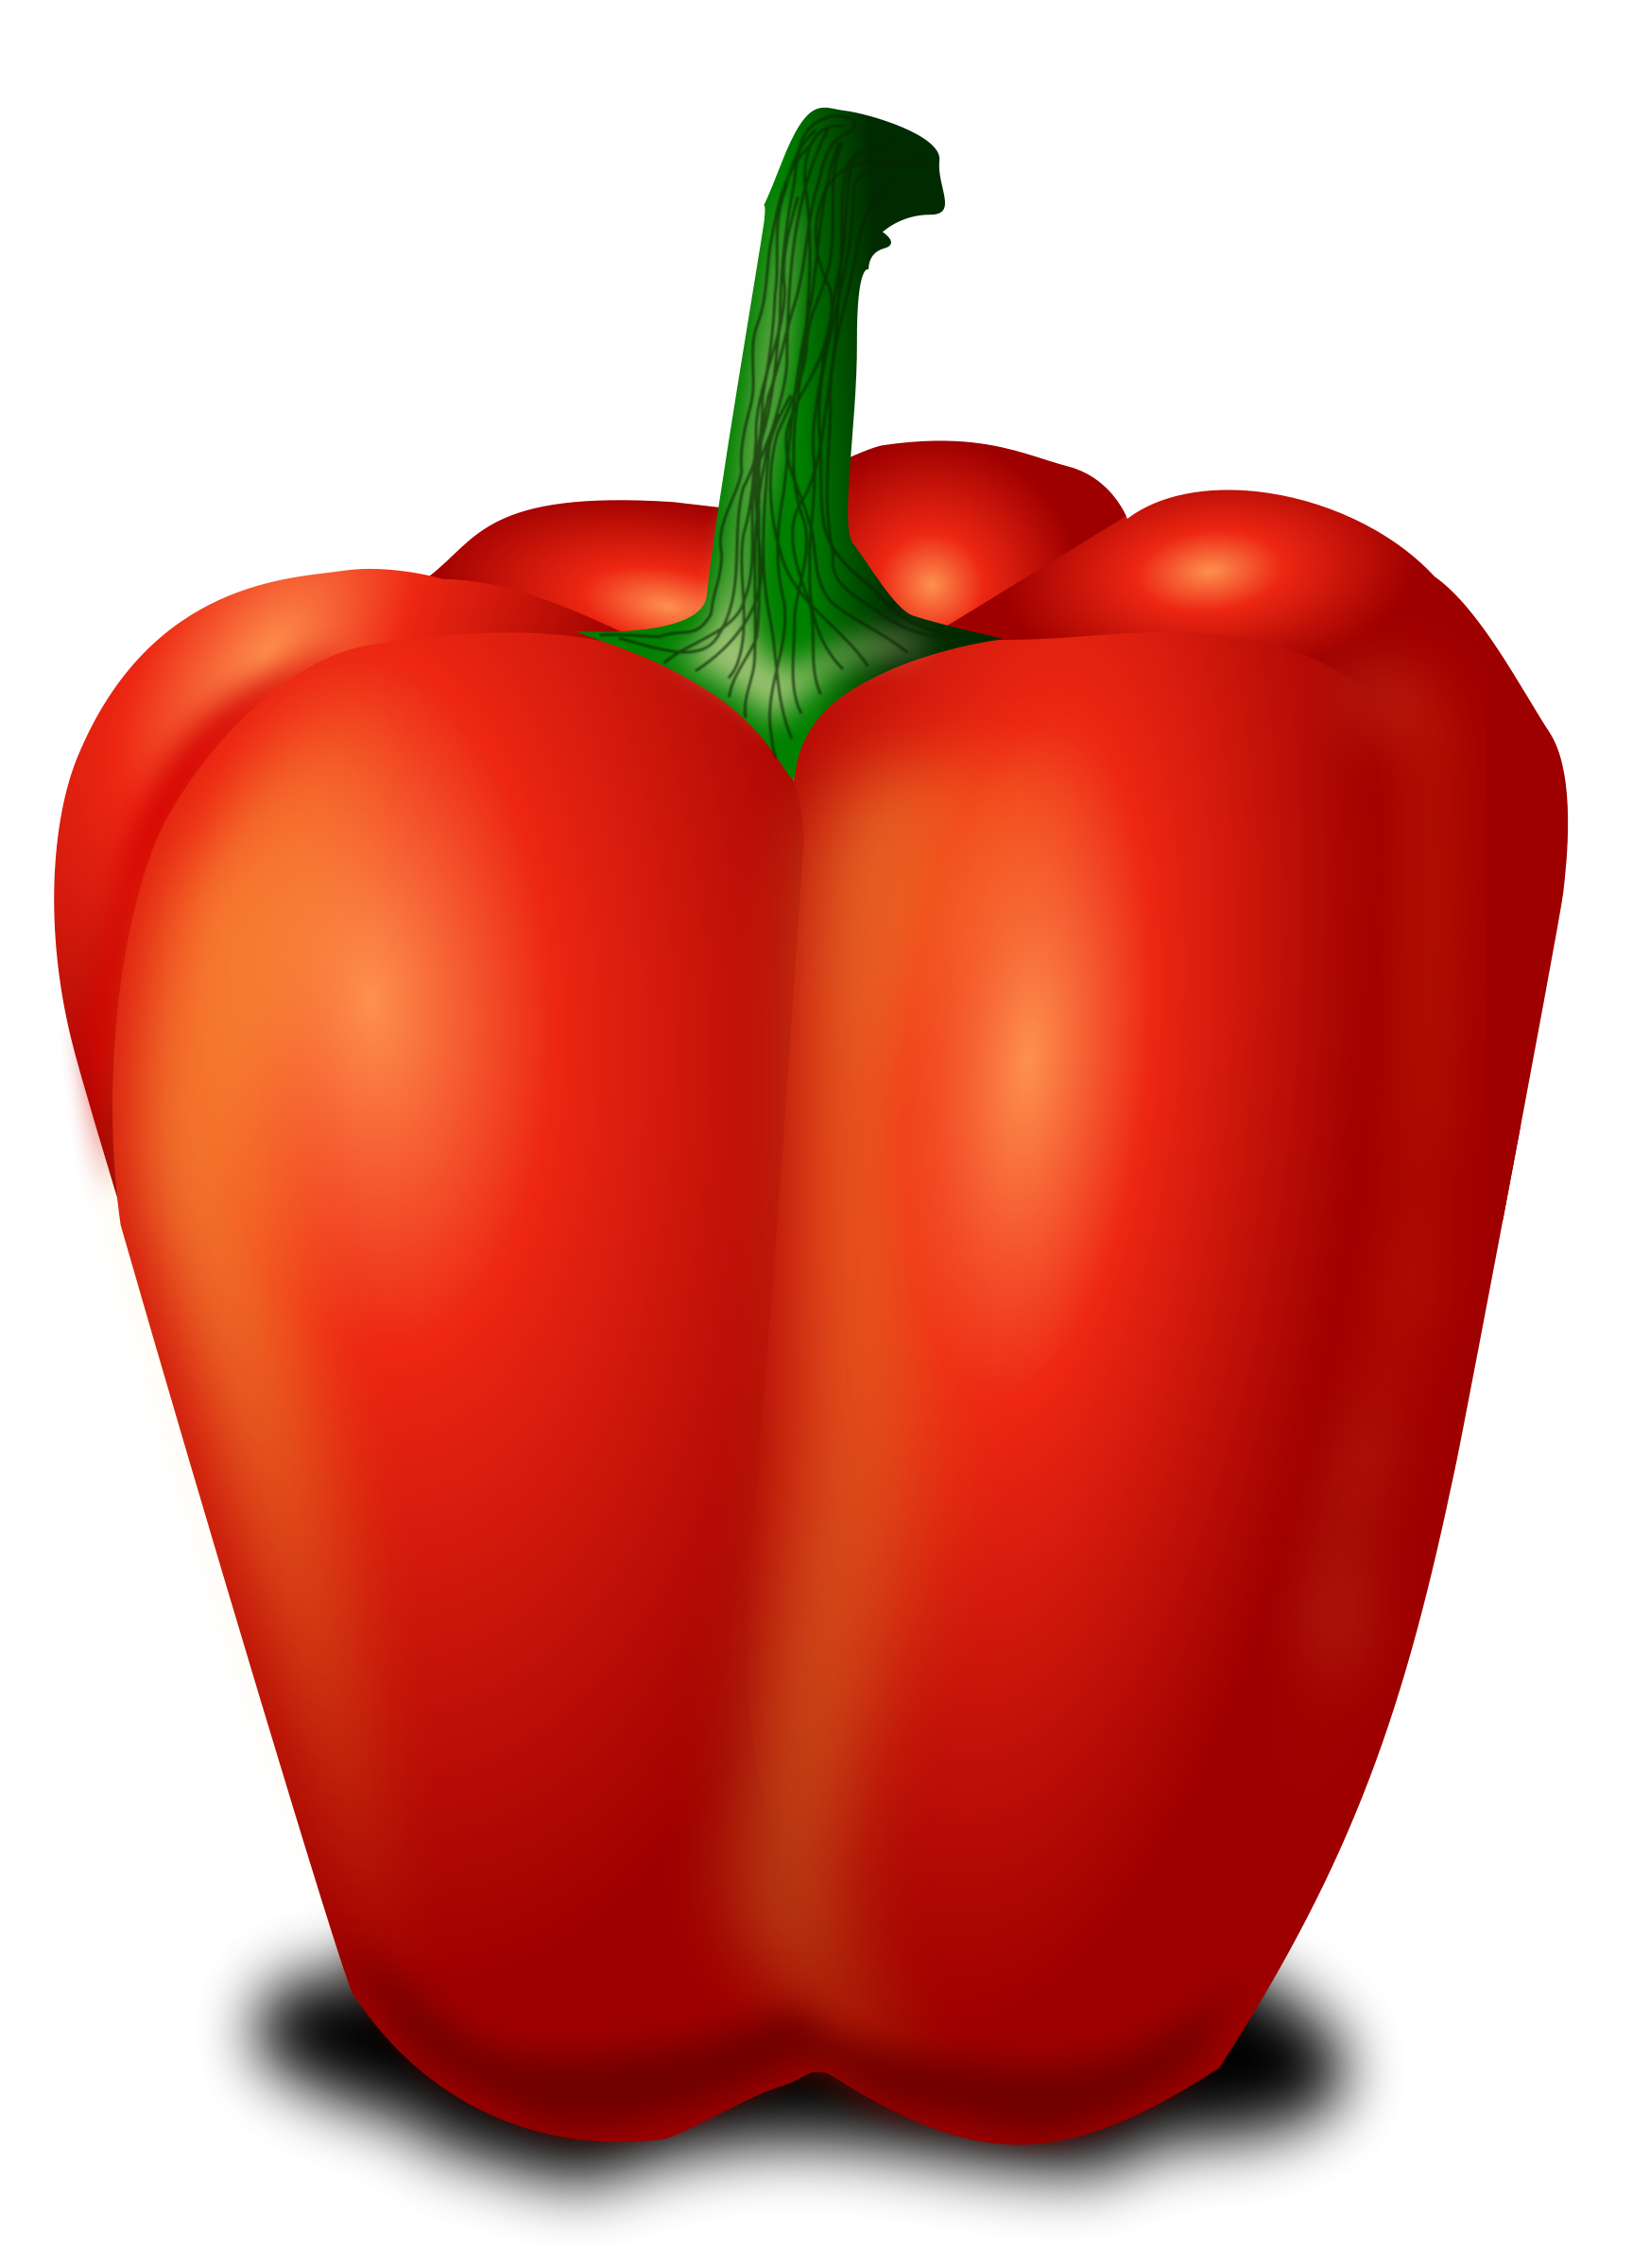 Pepper clipart spicy food. Png image free download